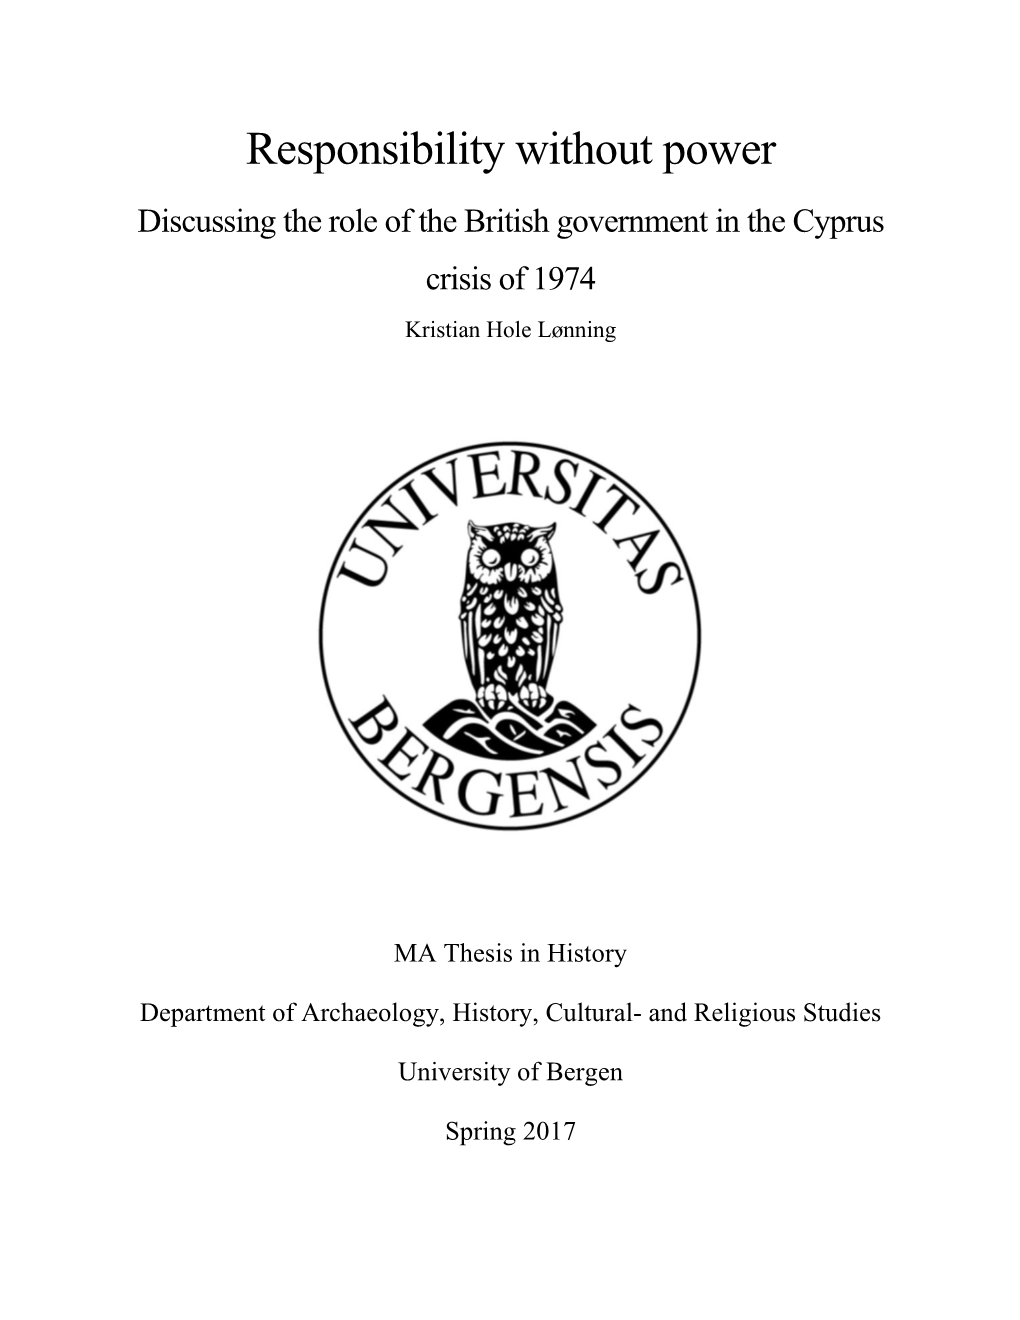 Responsibility Without Power Discussing the Role of the British Government in the Cyprus Crisis of 1974 Kristian Hole Lønning